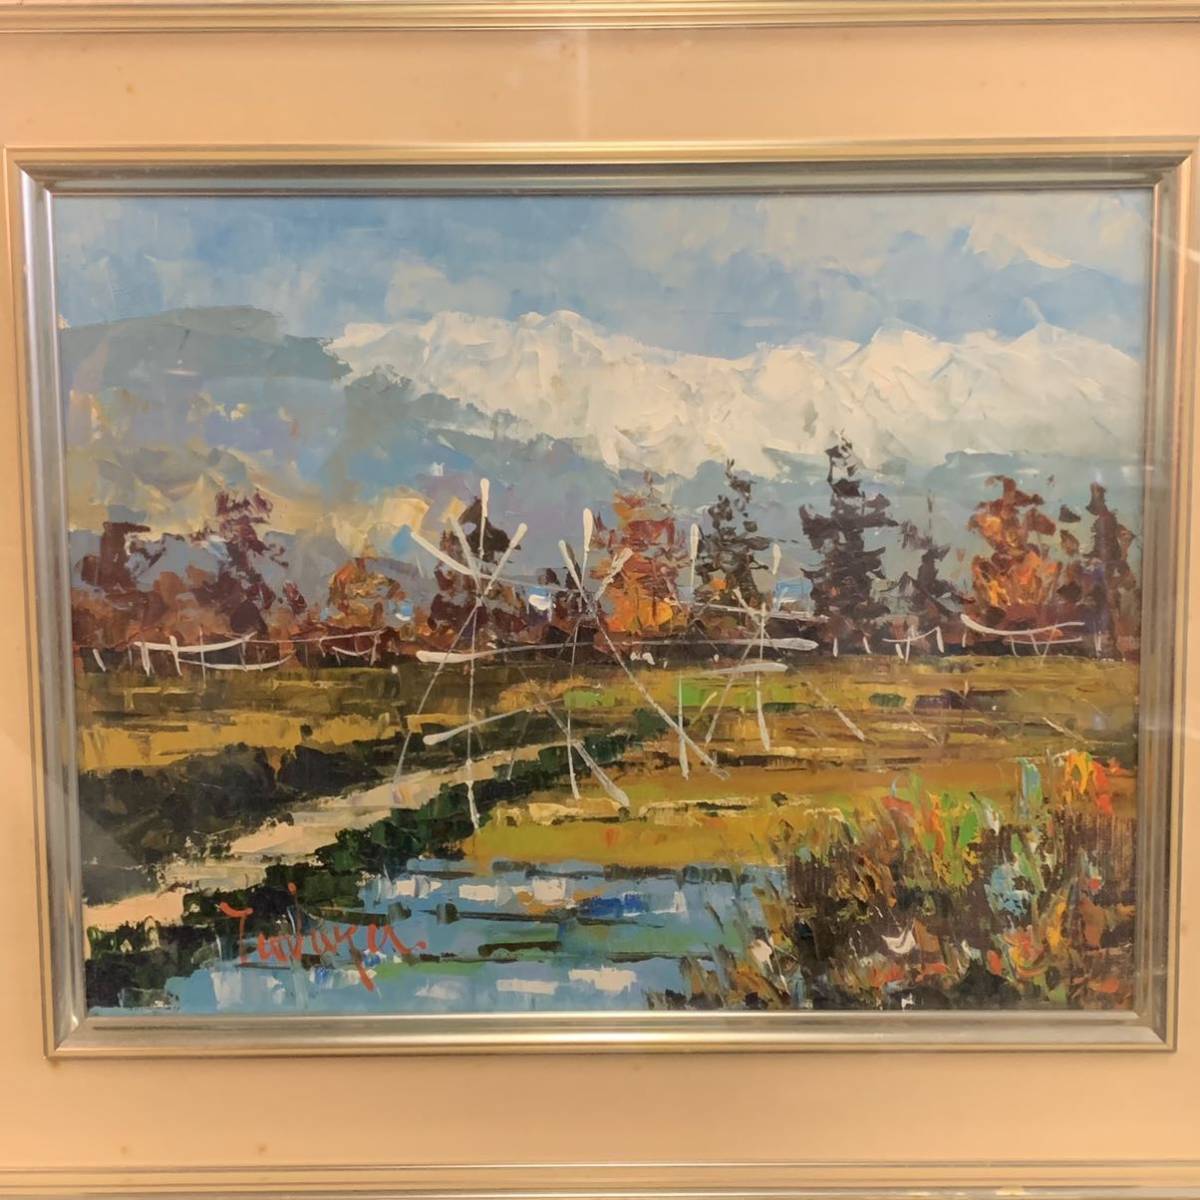  persimmon 73)[ white horse peak ] Zaimei rice field middle . oil painting landscape painting antique F6 frame amount size approximately 60×51. genuine work guarantee 